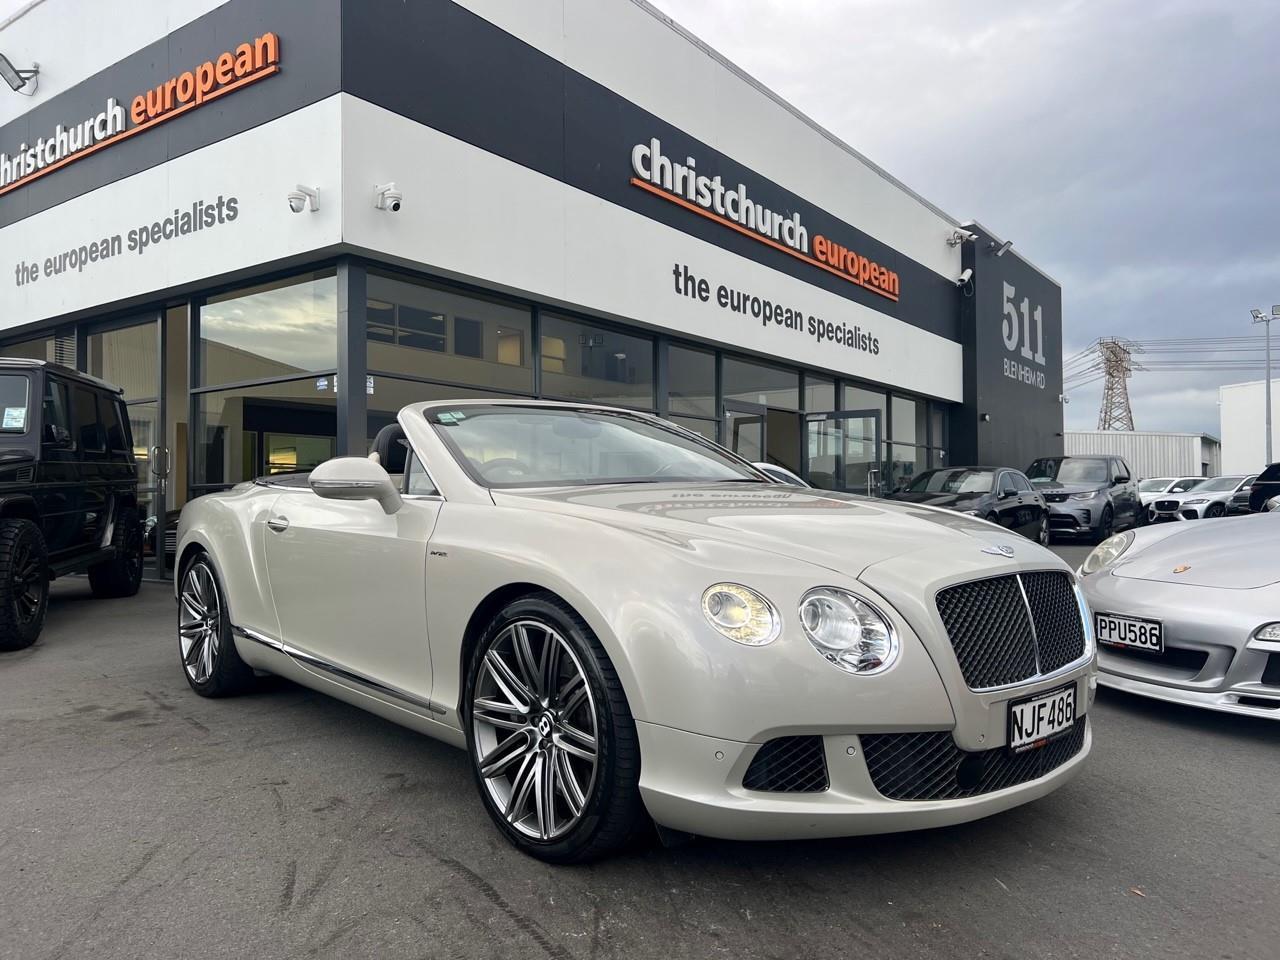 image-0, 2014 Bentley Continental GTC Speed Facelift Mullin at Christchurch